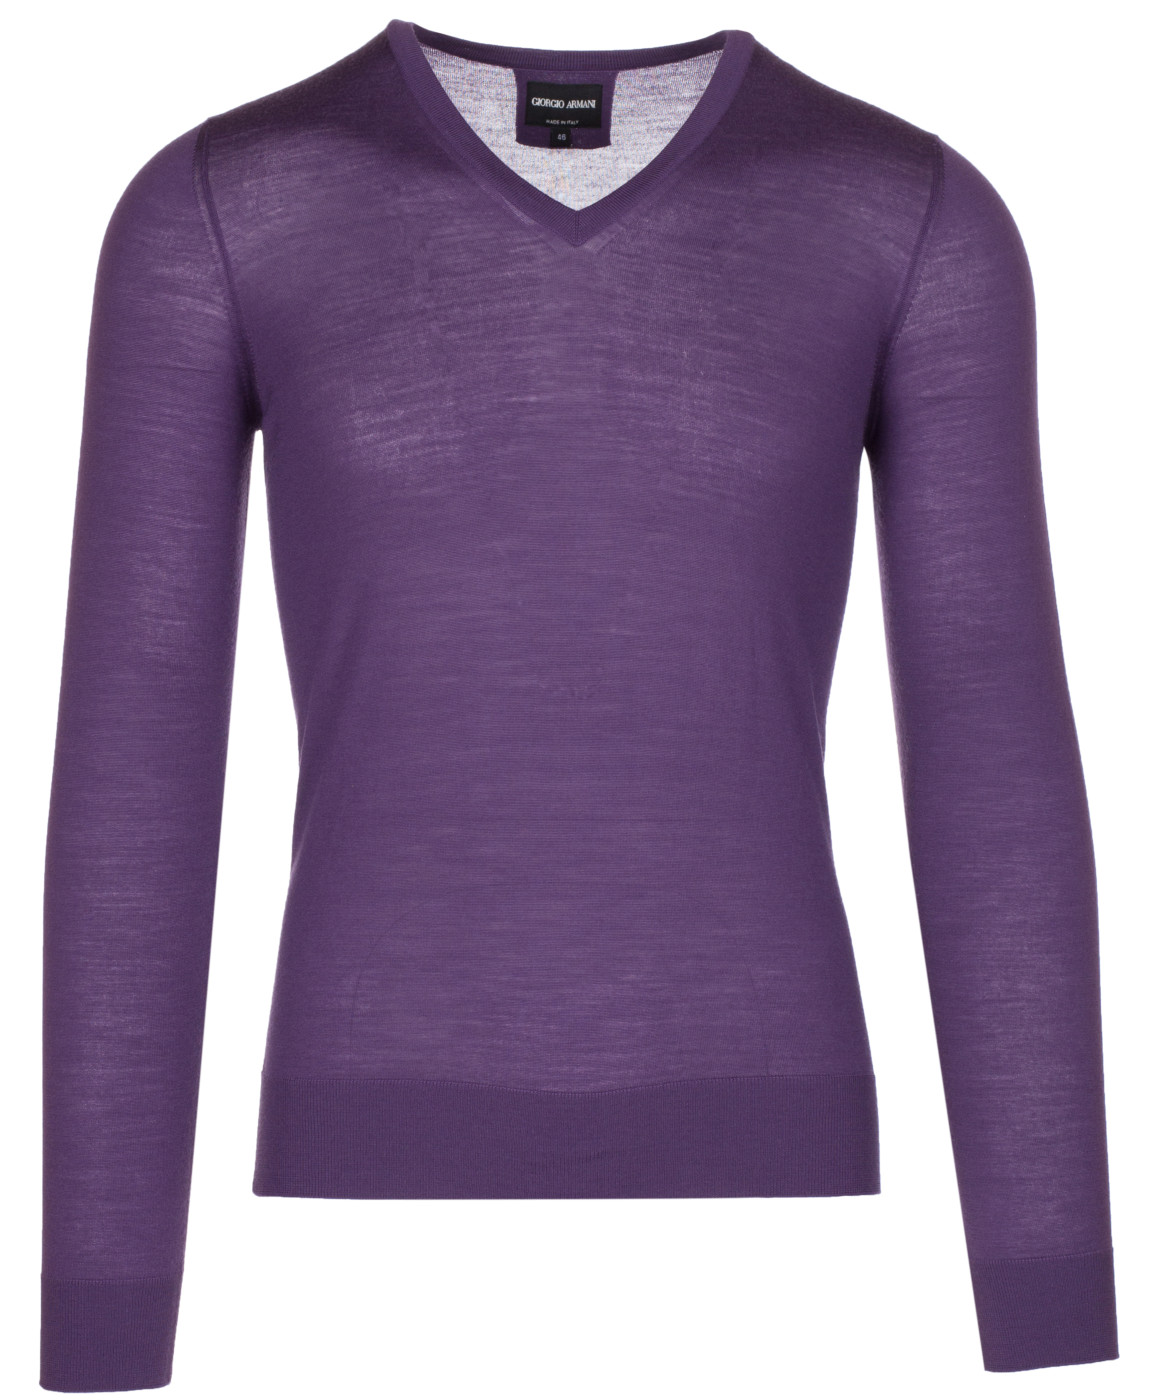 woocommerce-673321-2209615.cloudwaysapps.com-emporio-armani-mens-purple-100-wool-pullover-knitwear-v-neck-sweater